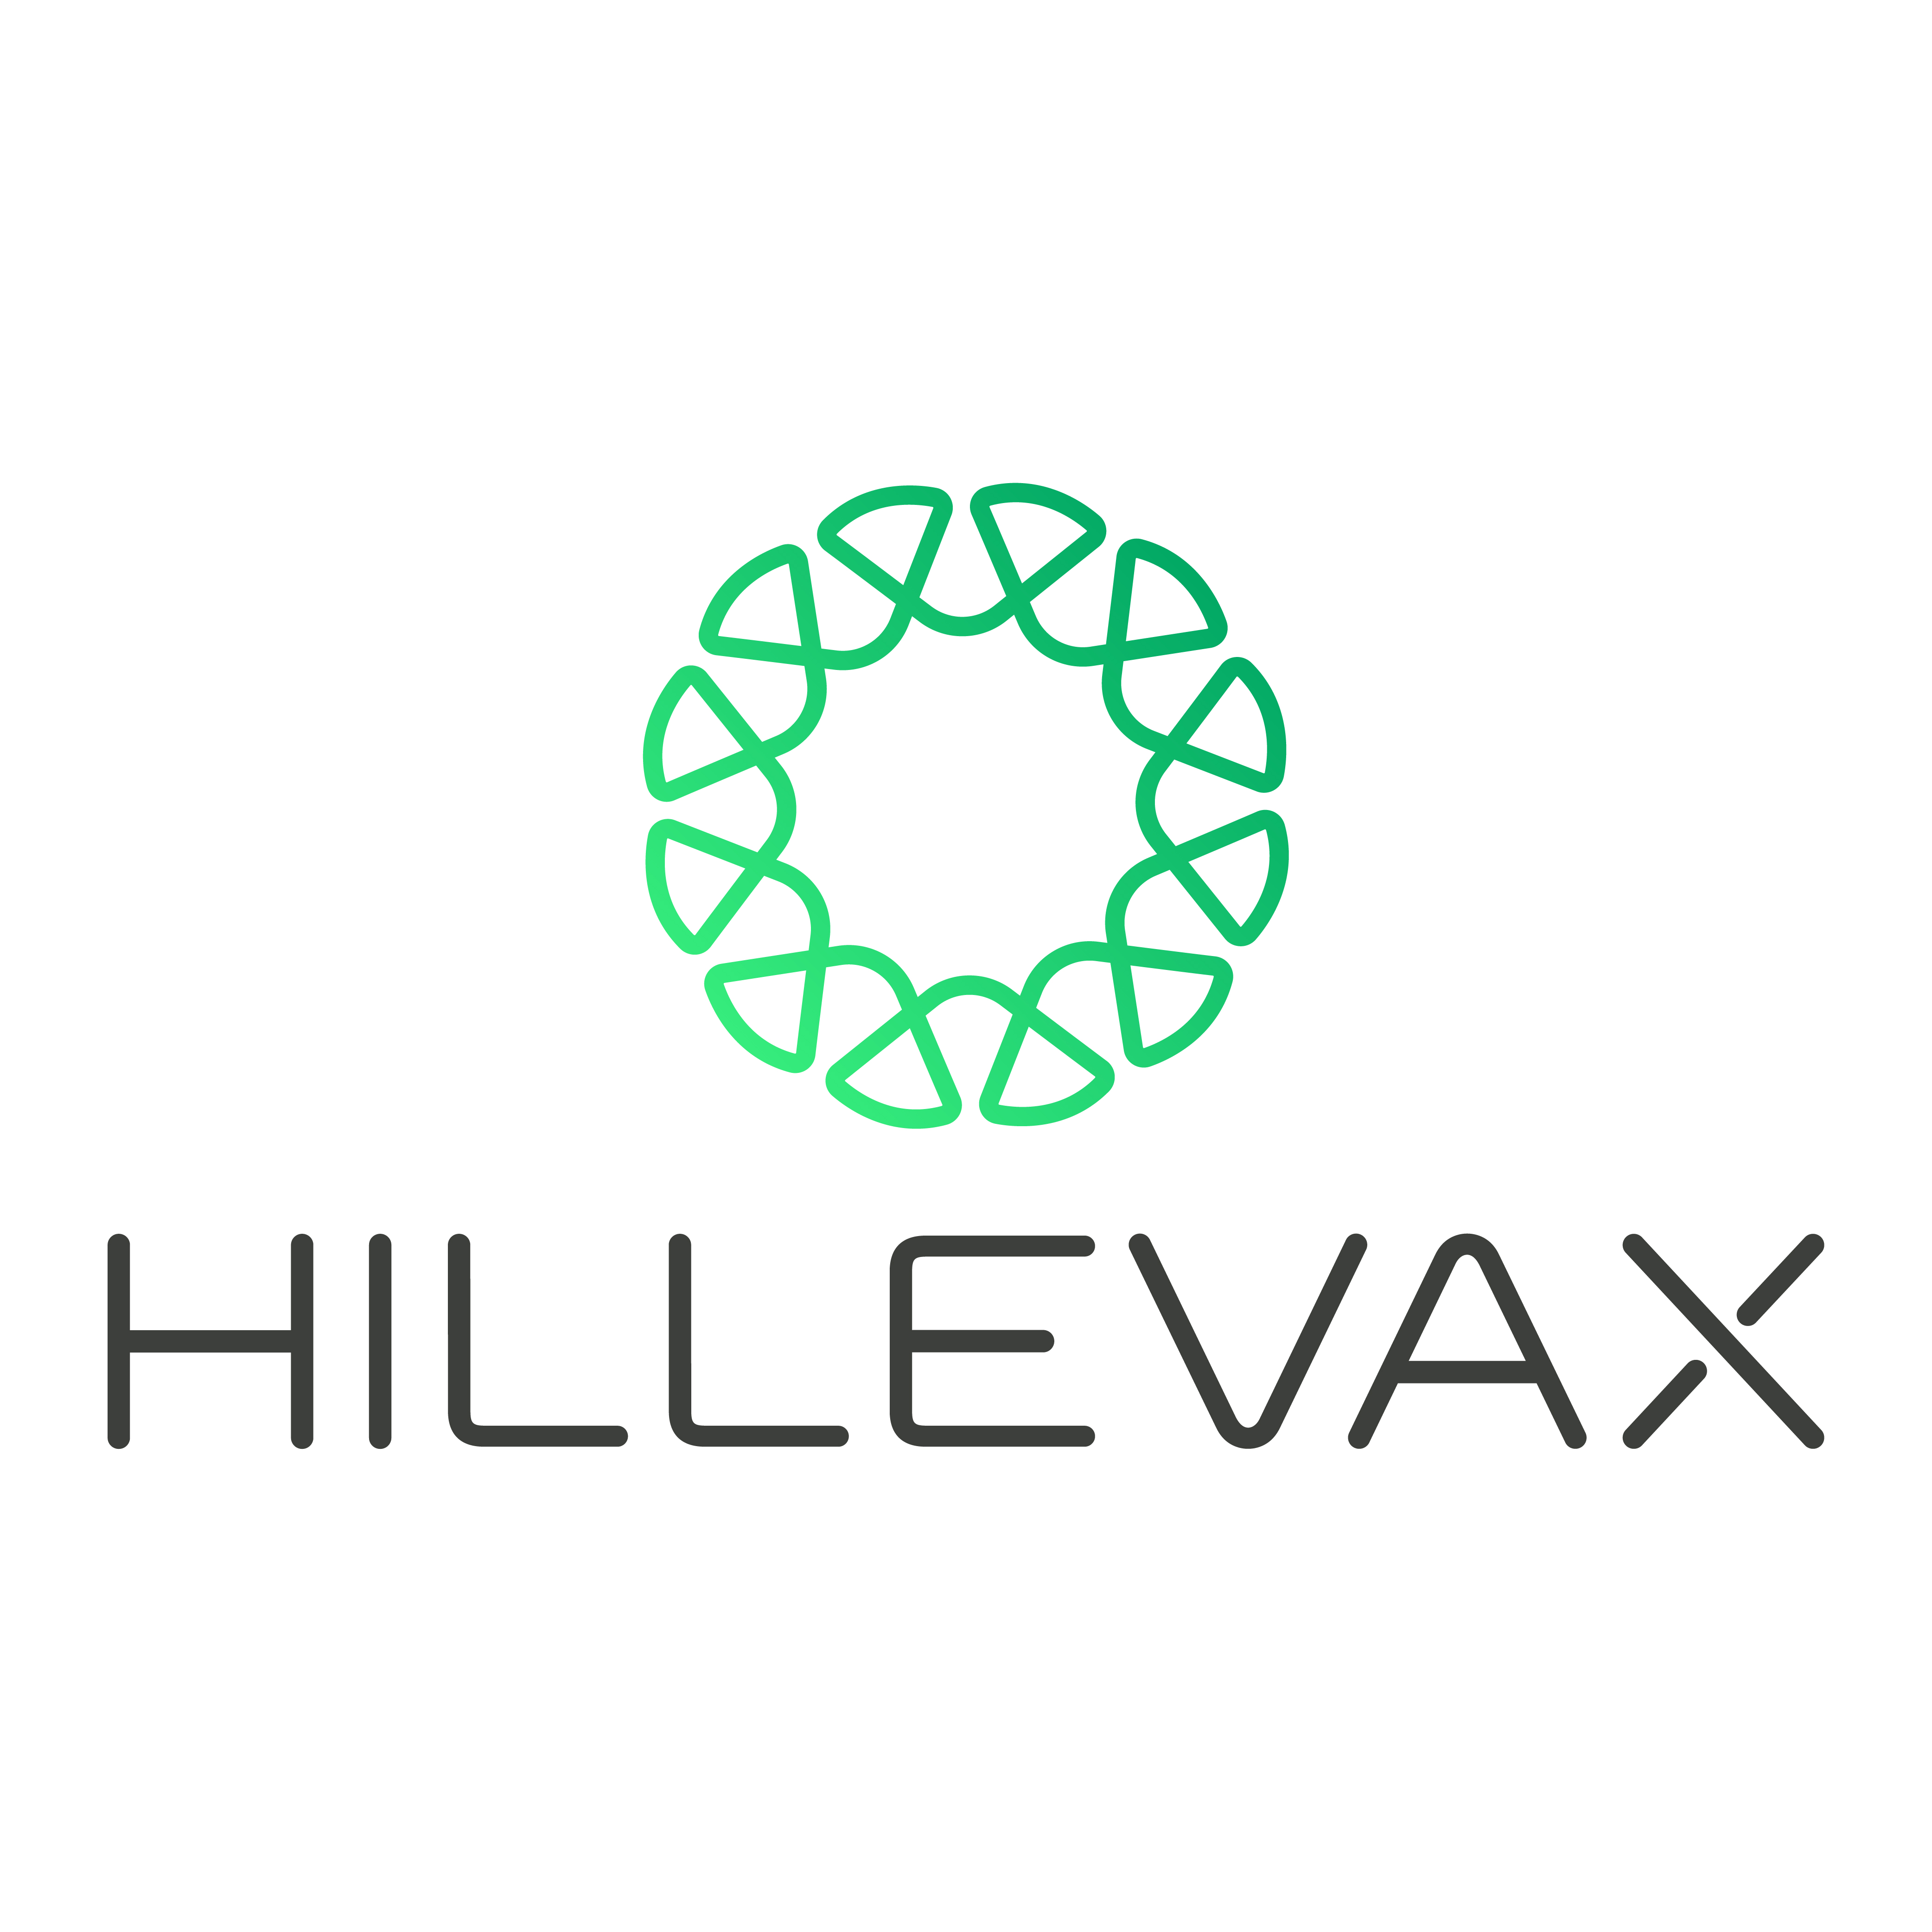 HilleVax is a clinical-stage biopharmaceutical company focused on developing and commercializing novel vaccines, listed on Nasdaq on April 29, 2022.